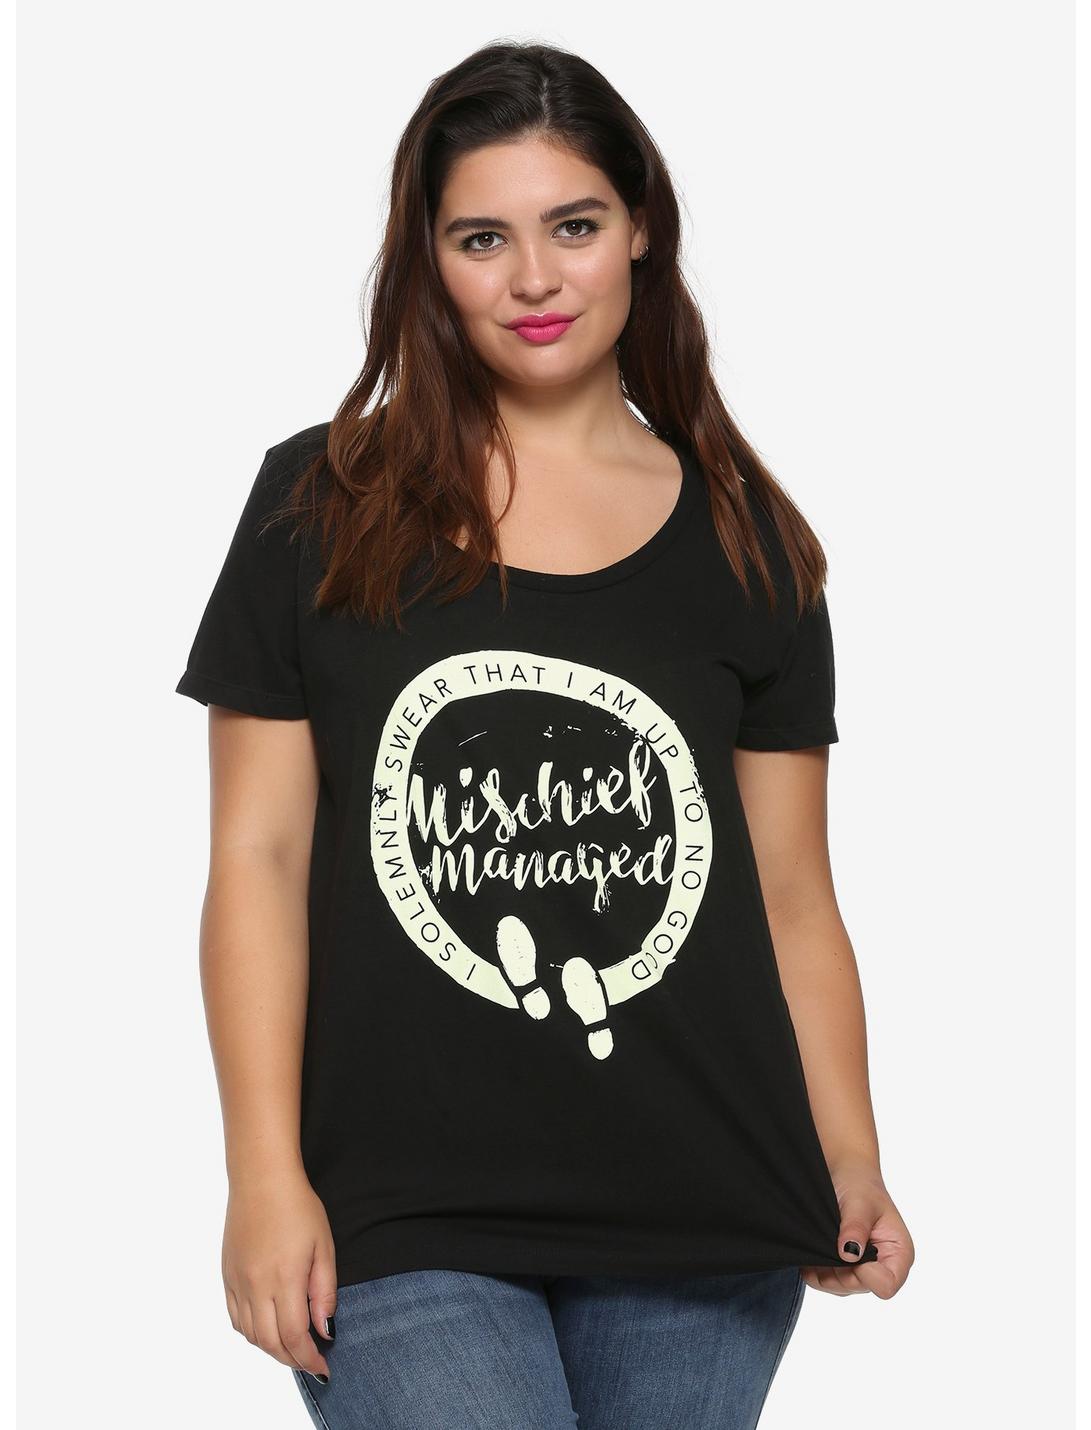 Harry Potter Up To No Good & Mischief Managed Girls T-Shirt Plus Size, WHITE, hi-res